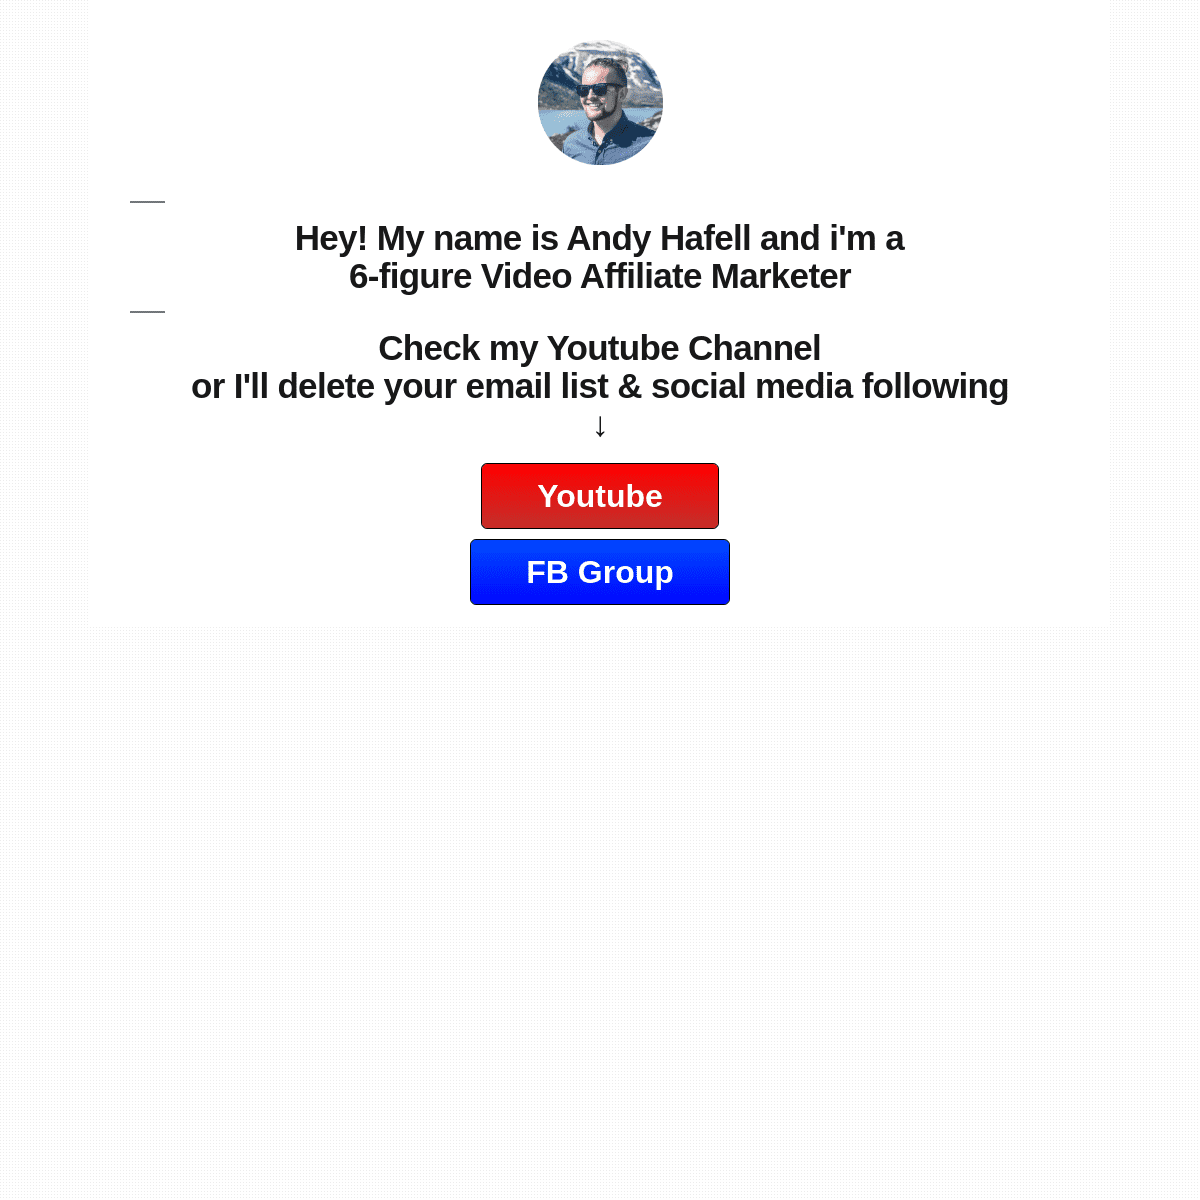 A complete backup of andyhafell.com